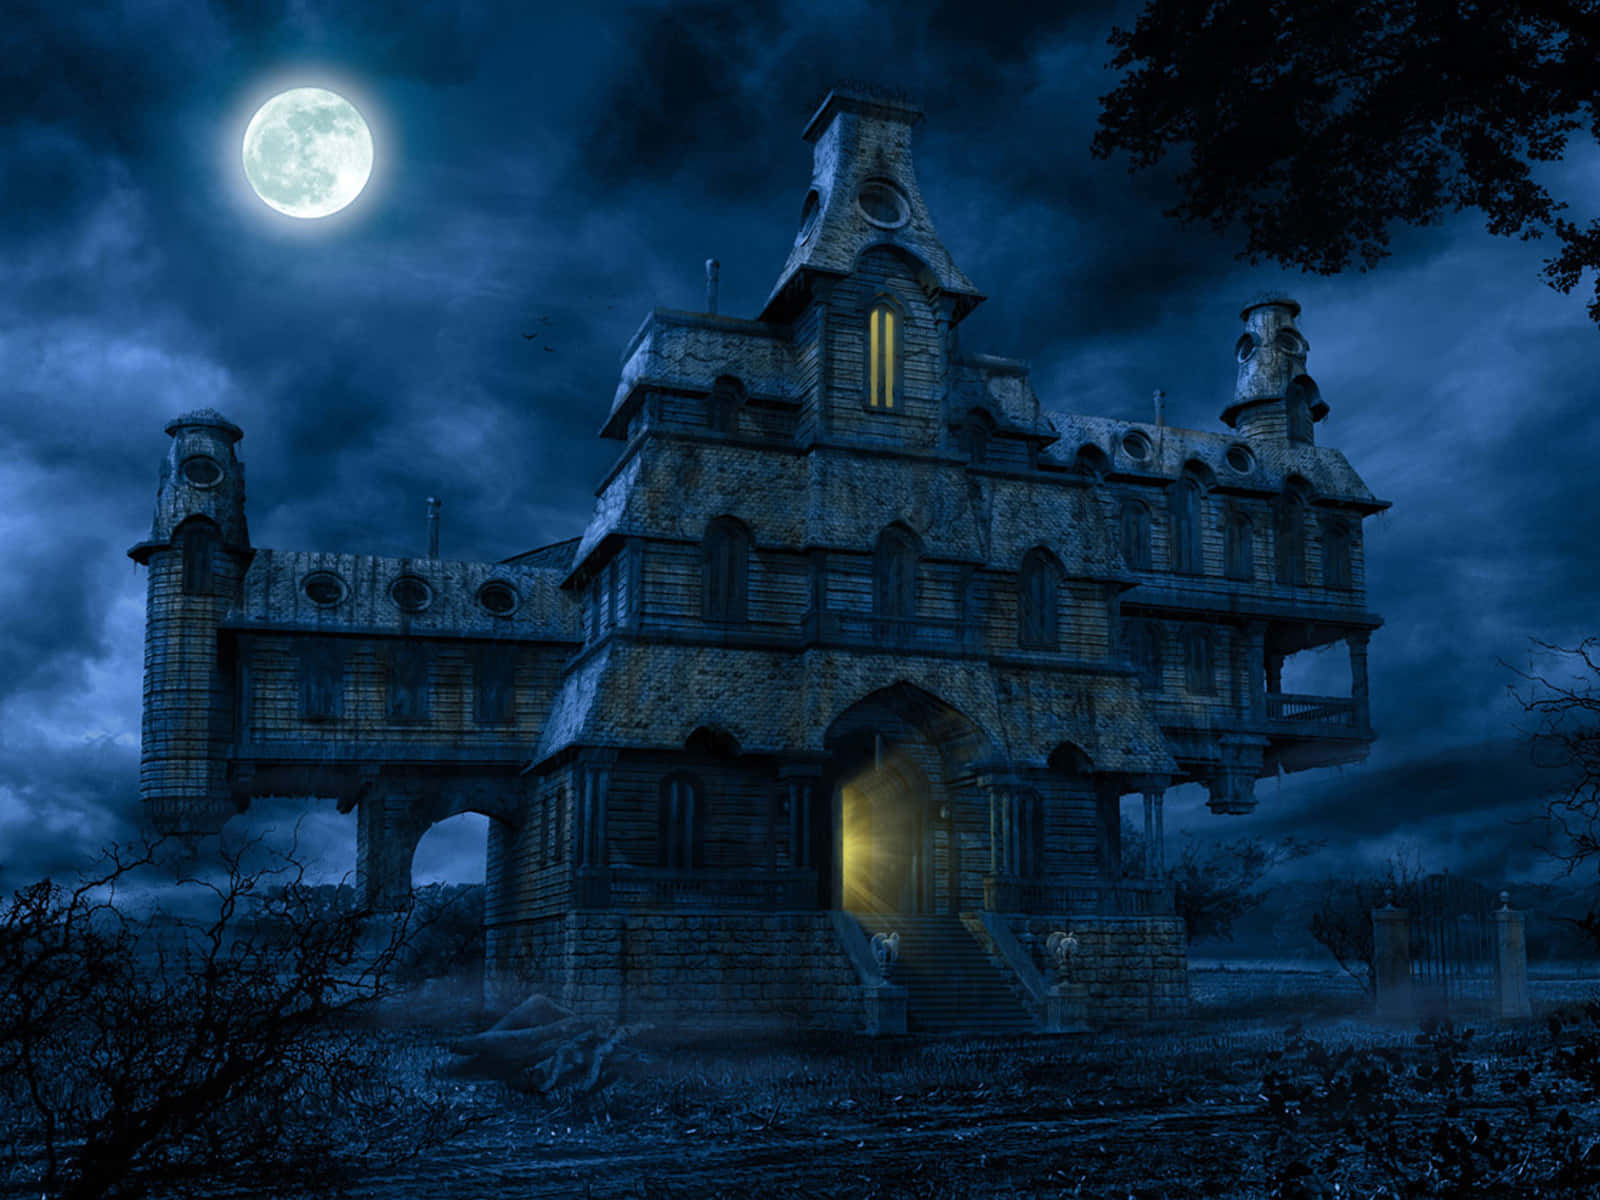 Get ready to jump into the spooky Halloween spirit with this classic gothic landscape